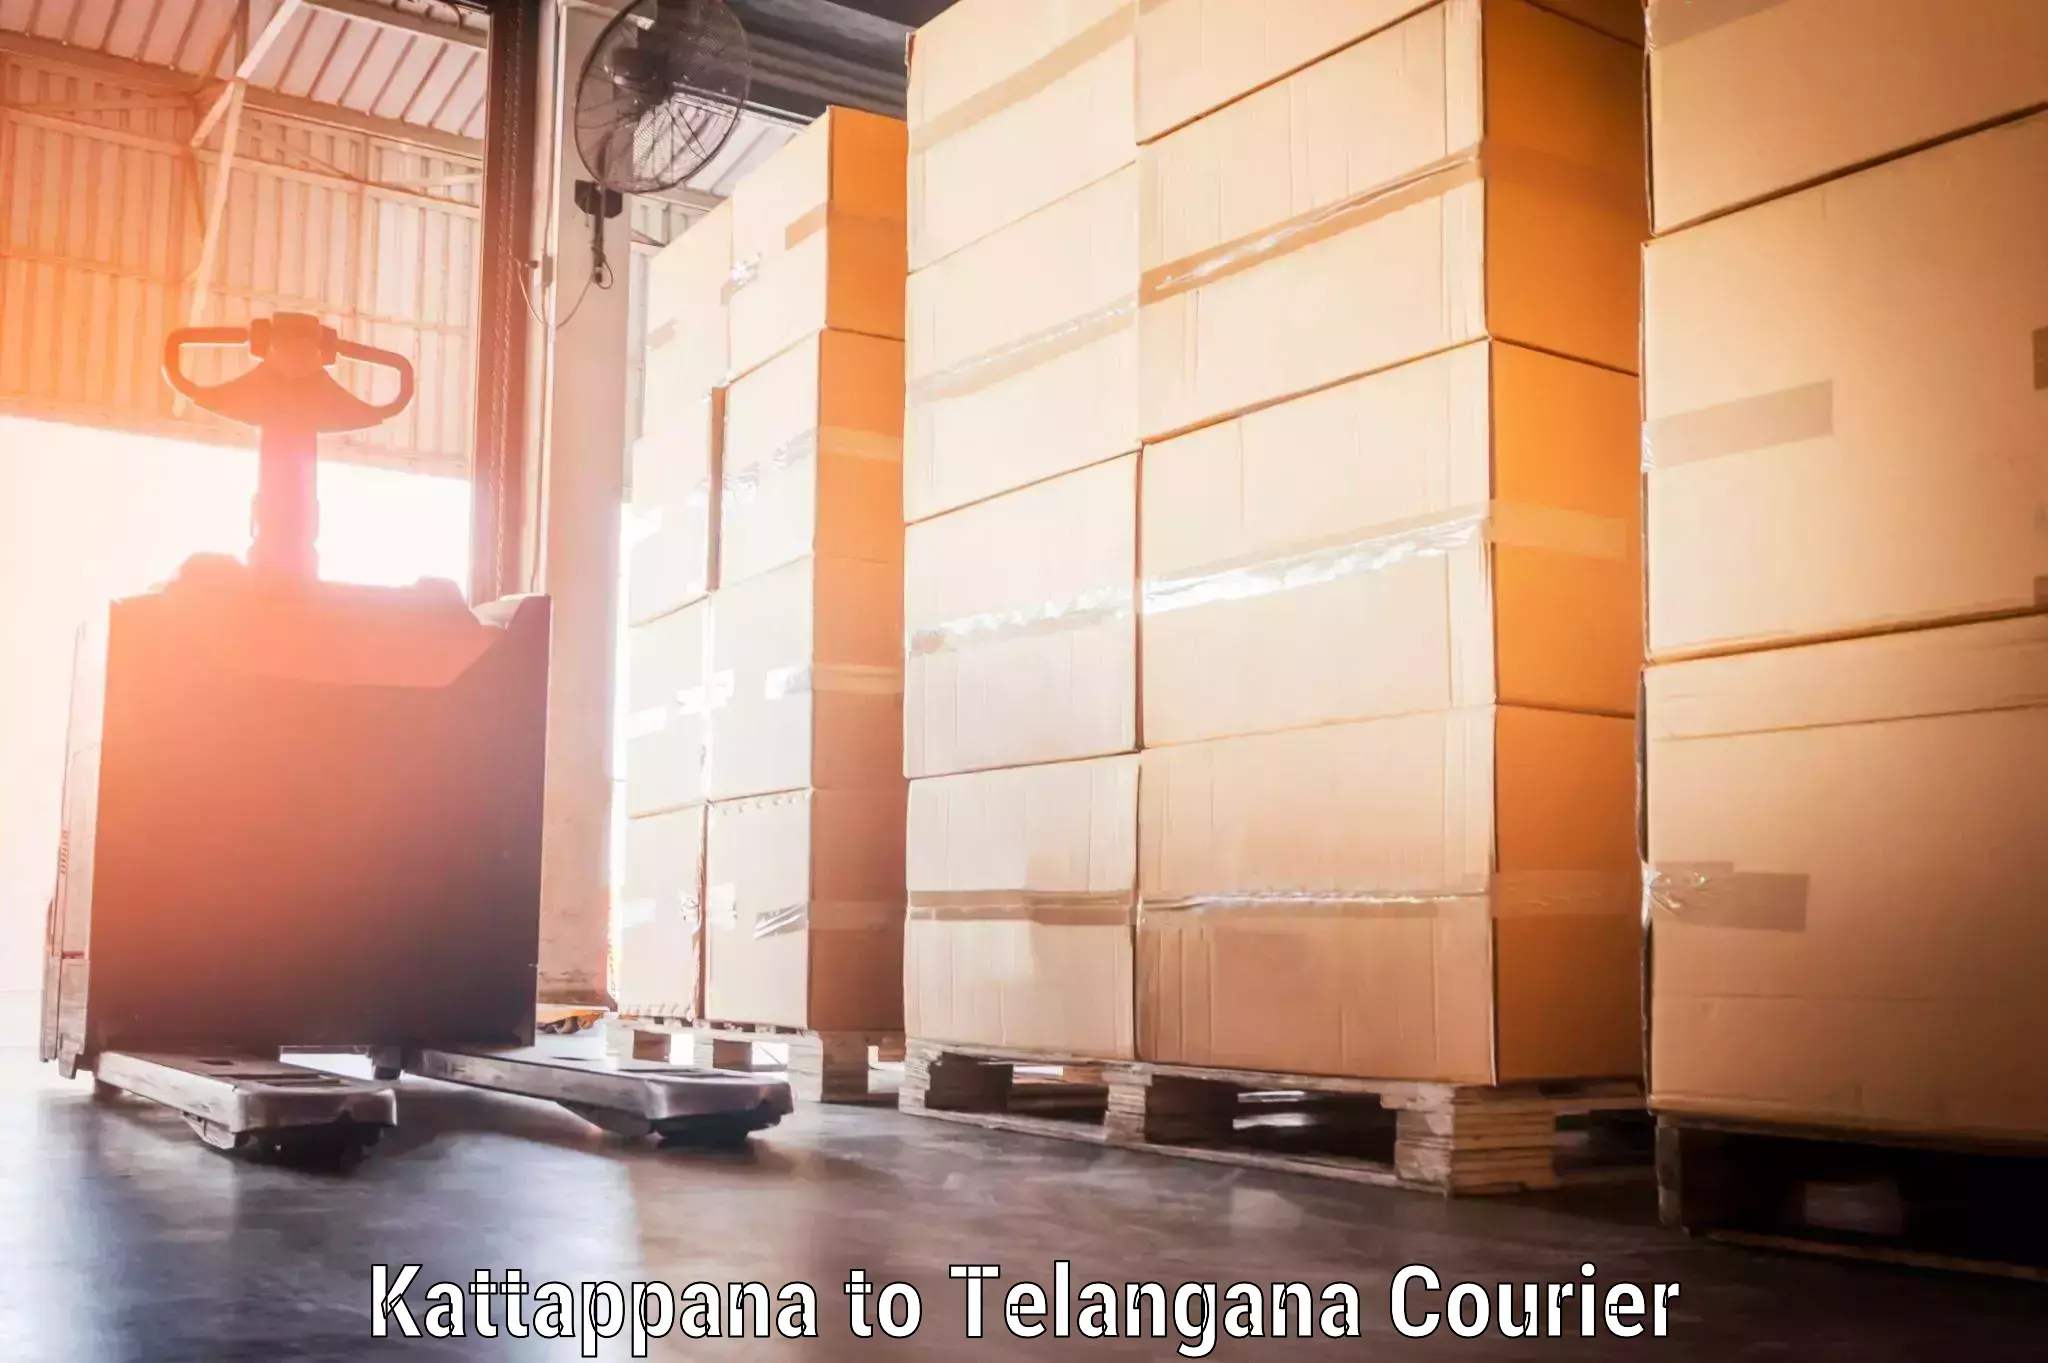 Luggage storage and delivery in Kattappana to Secunderabad